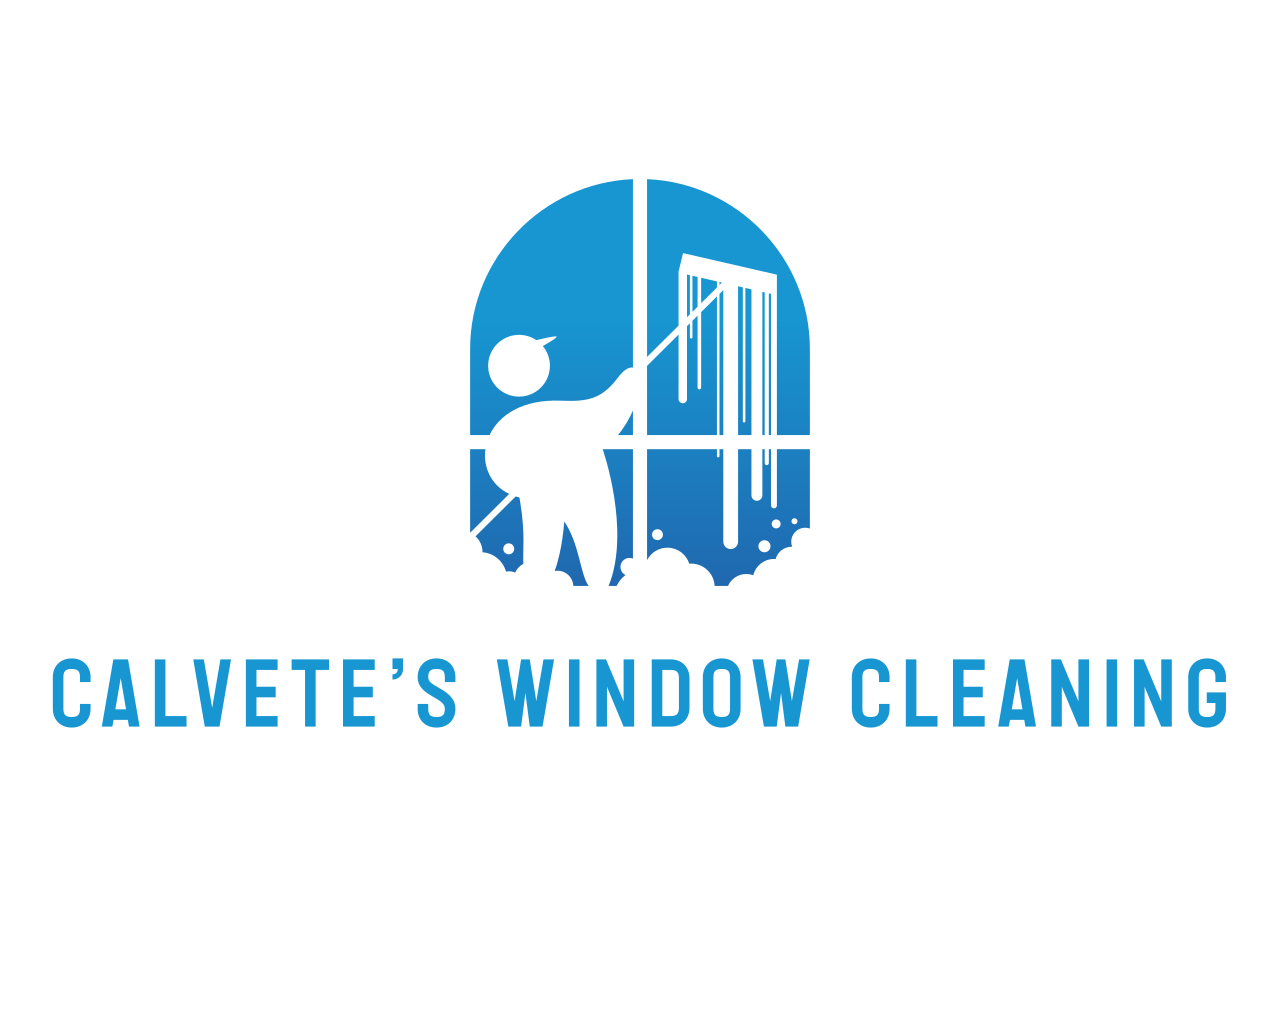 Calvete’s Window Cleaning's web page